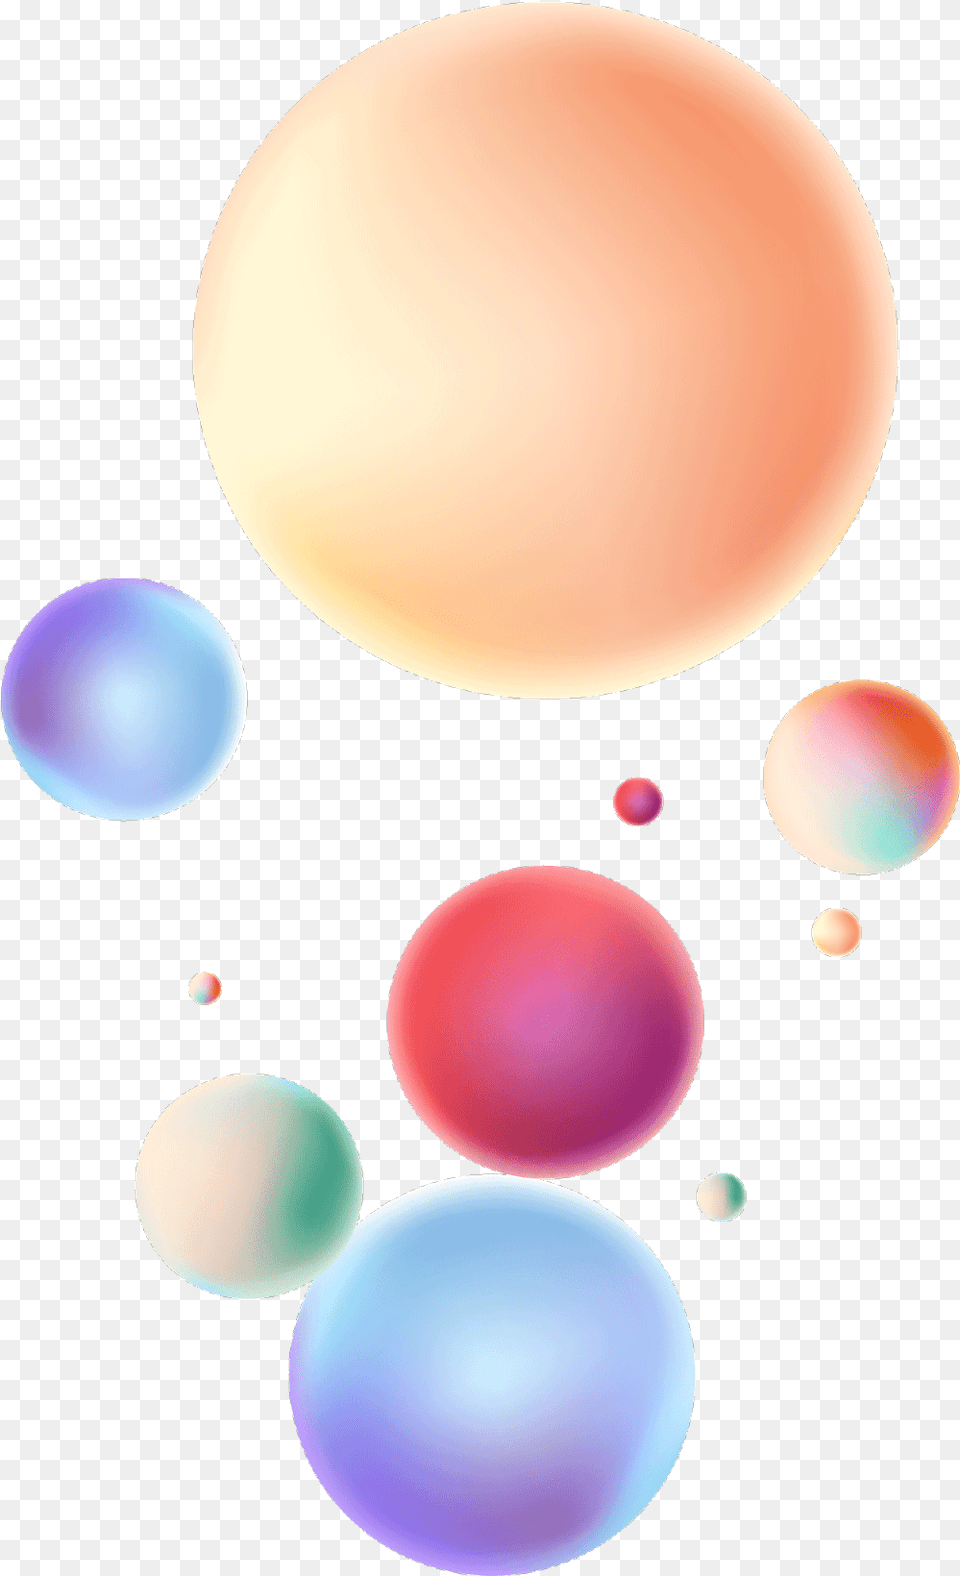 Circle, Sphere, Balloon, Egg, Food Free Png Download